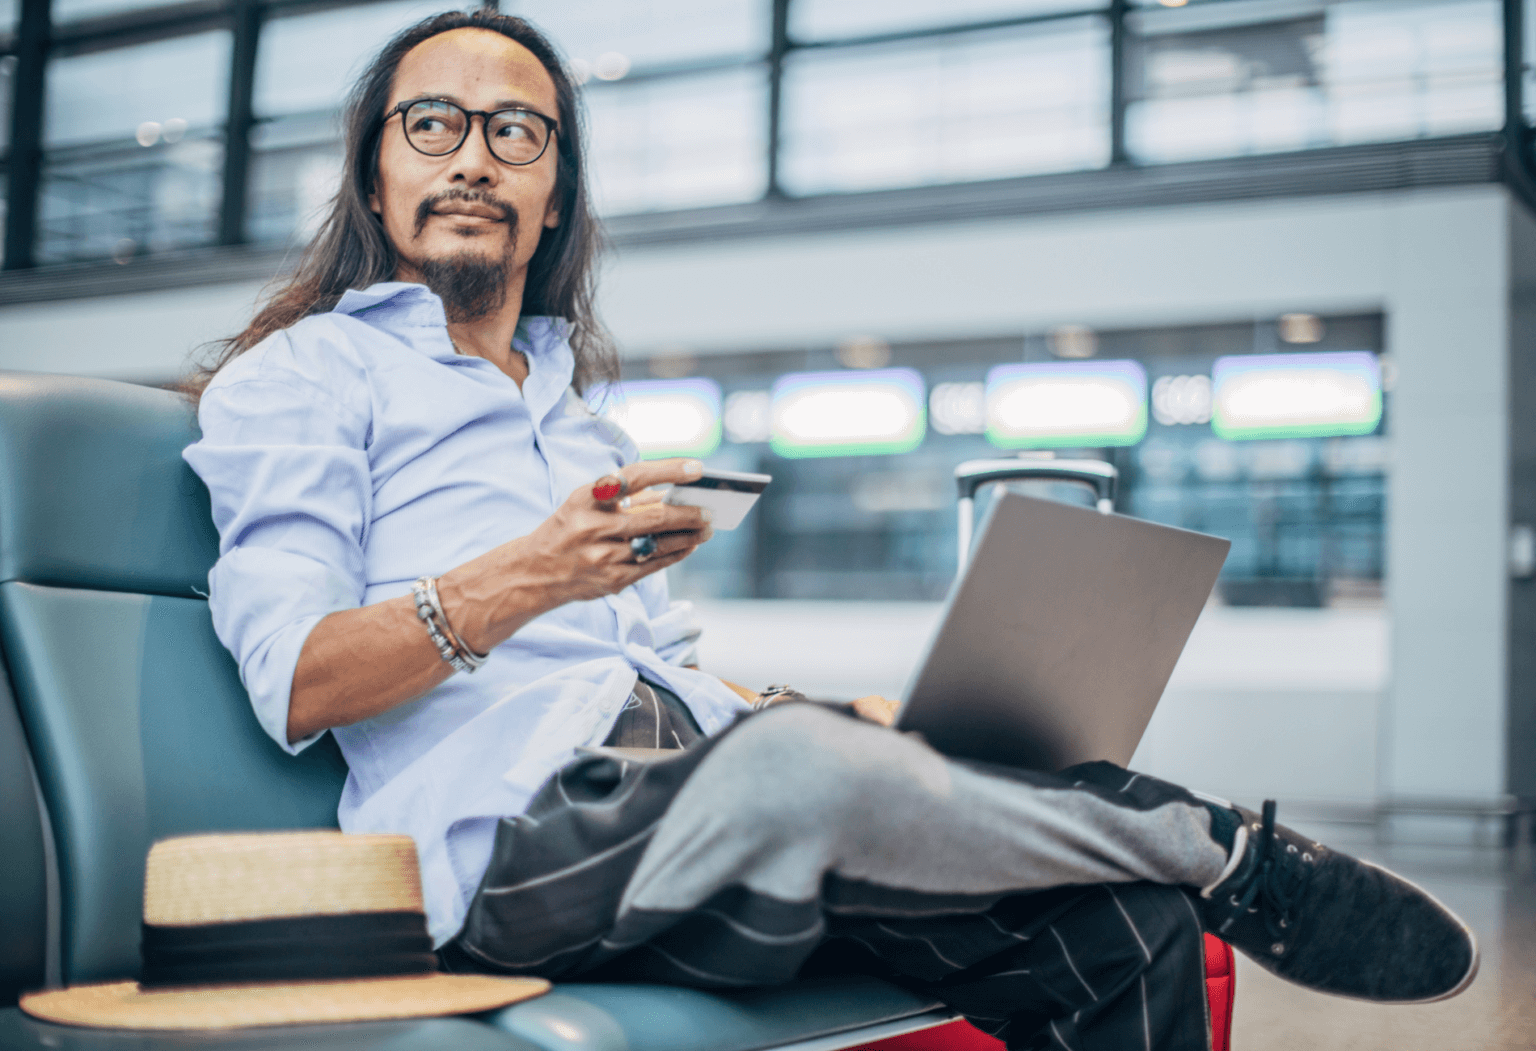 person holding a credit card with laptop on them in the airport, article on credit card sign up bonuses